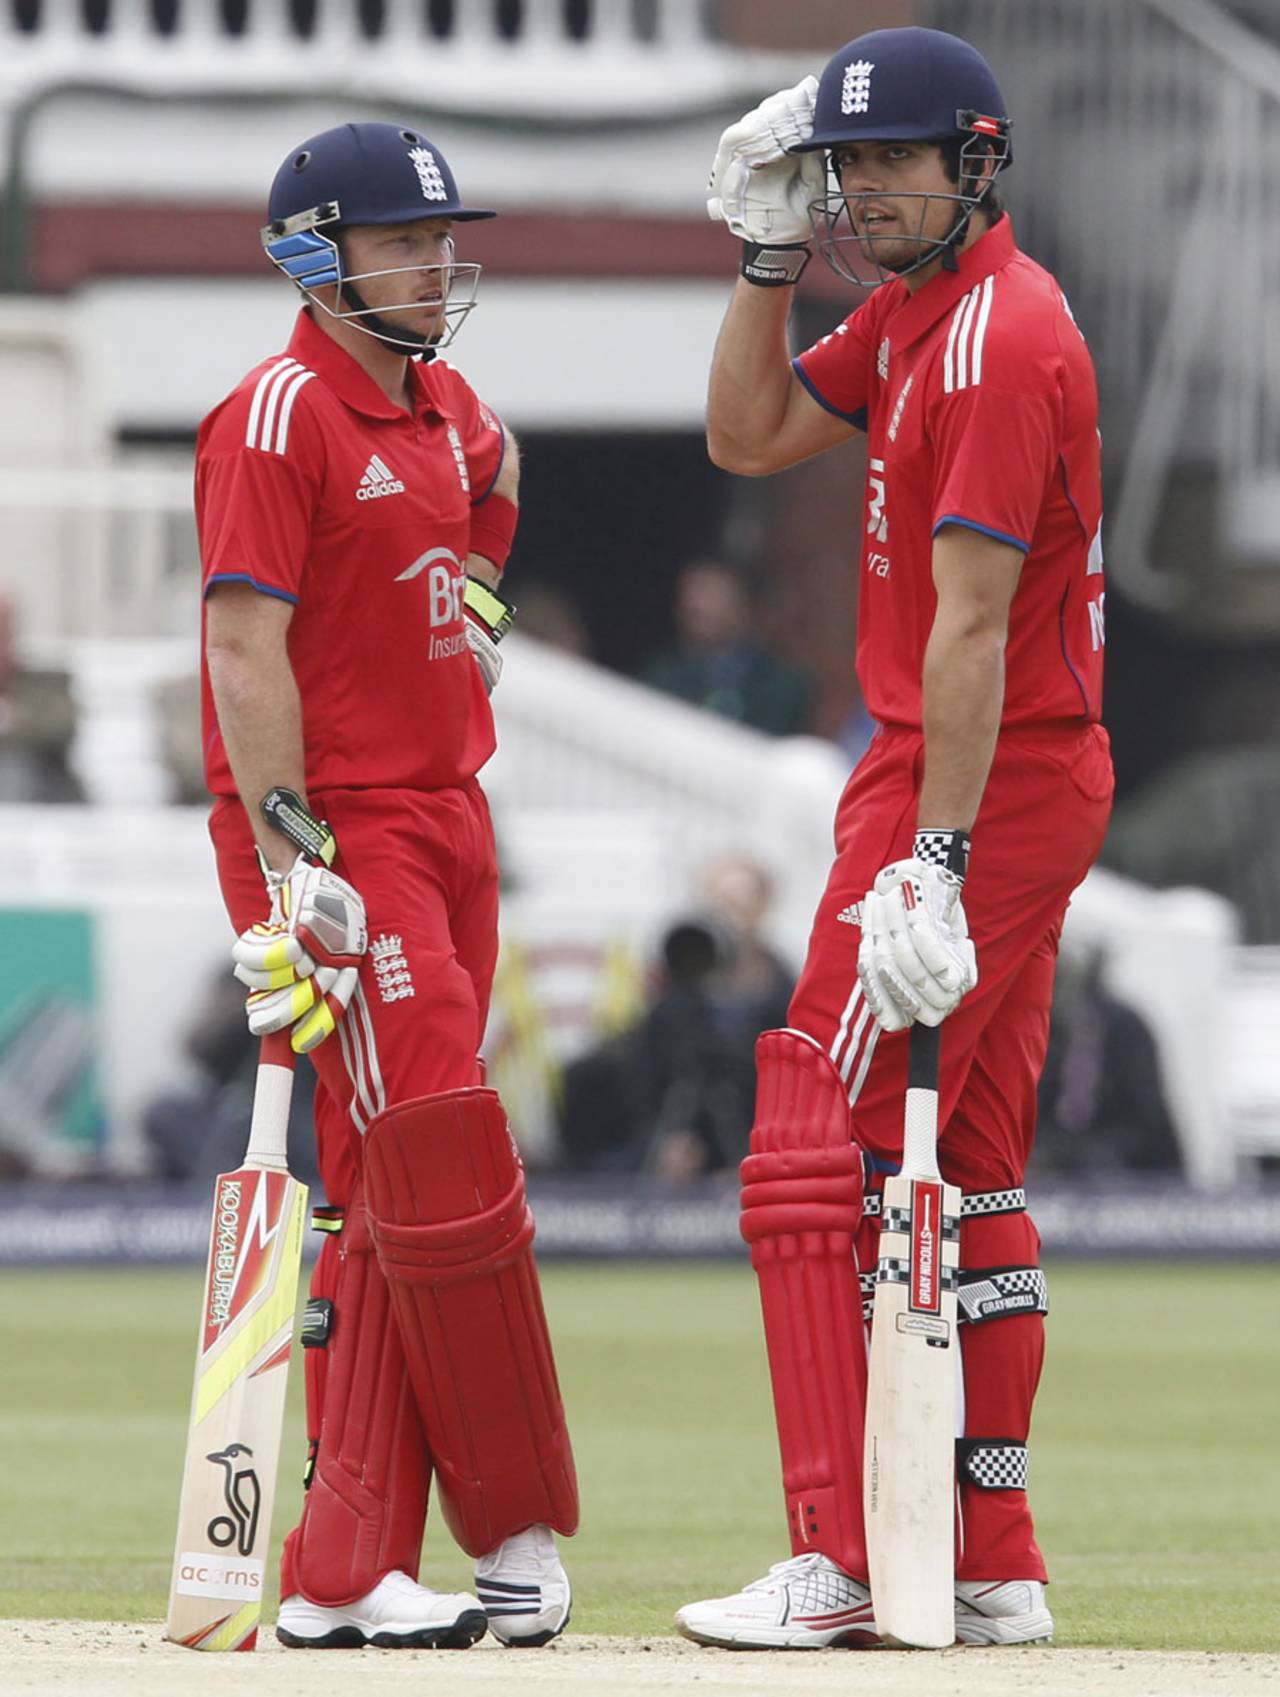 Ian Bell and Alastair Cook put on 45 for the first wicket, England v New Zealand, 1st ODI, Lord's, May 31, 2013